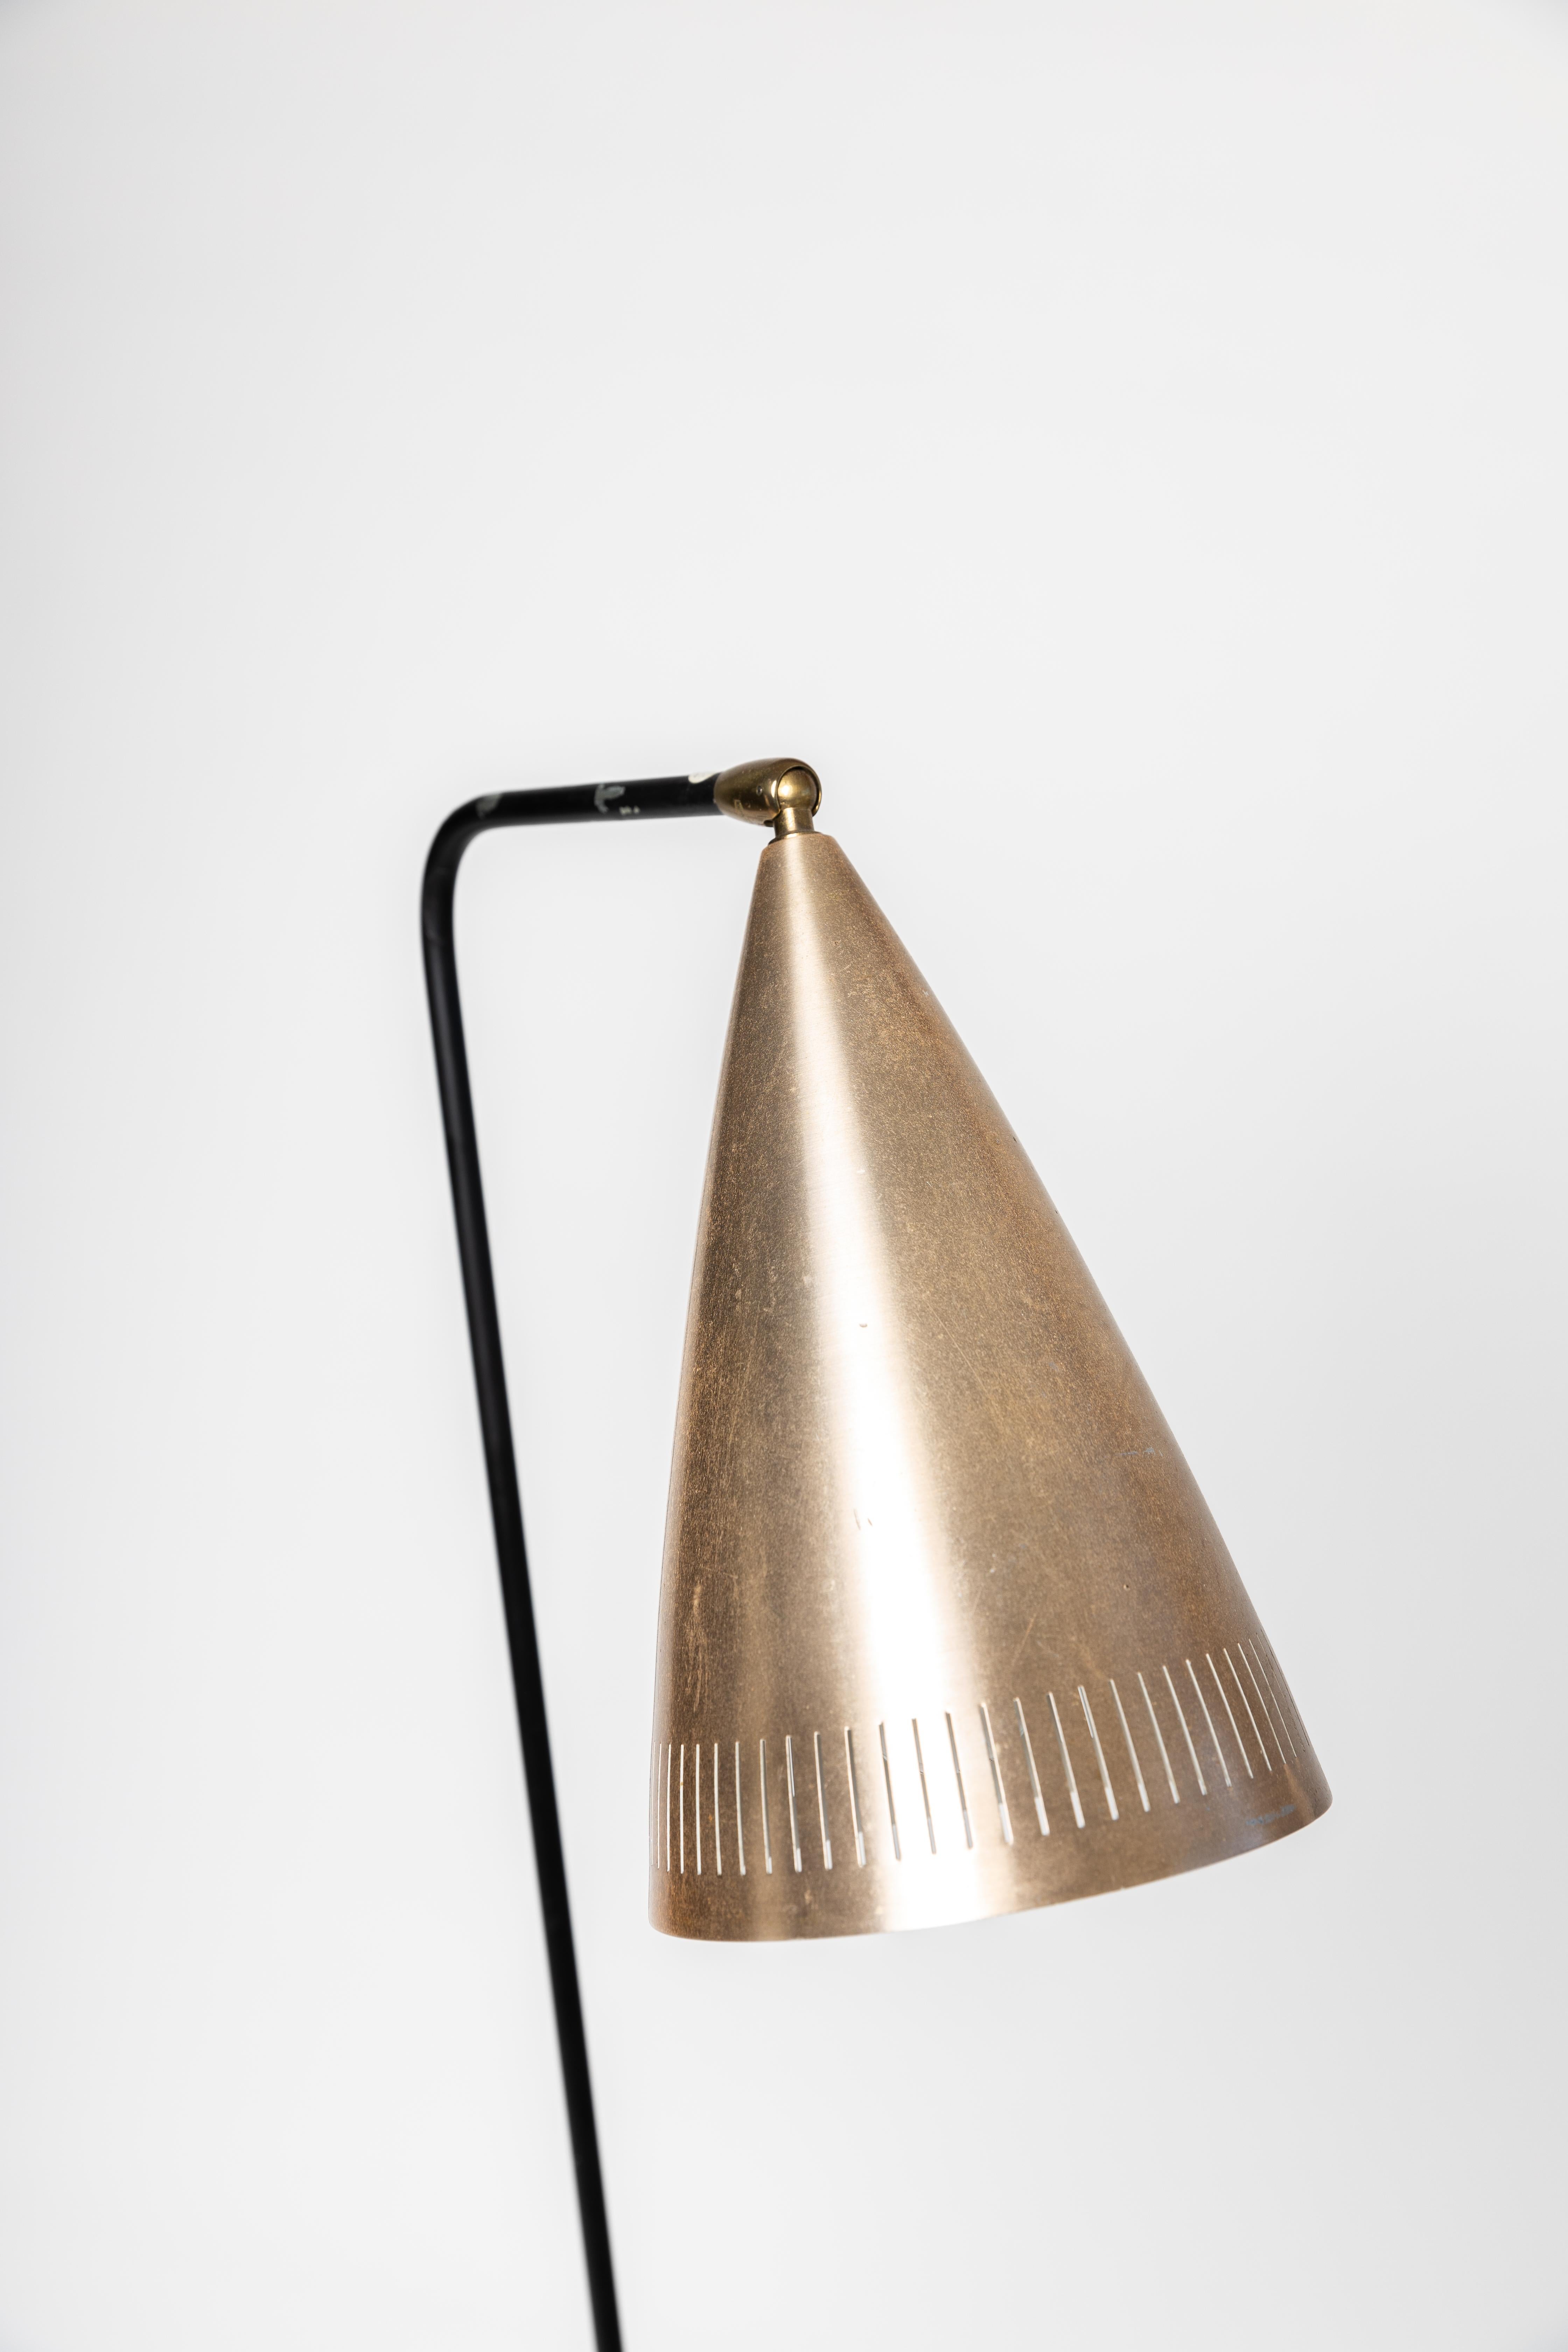 Mid century floor lamp, attributed to Danish designer Svend Aage Holm Sørensen for Swedish company ASEA. Probably from the 1950s. Lot of similarities to the Grasshopper light.

Golden light shade and black lacquered body. 
The light is tested and